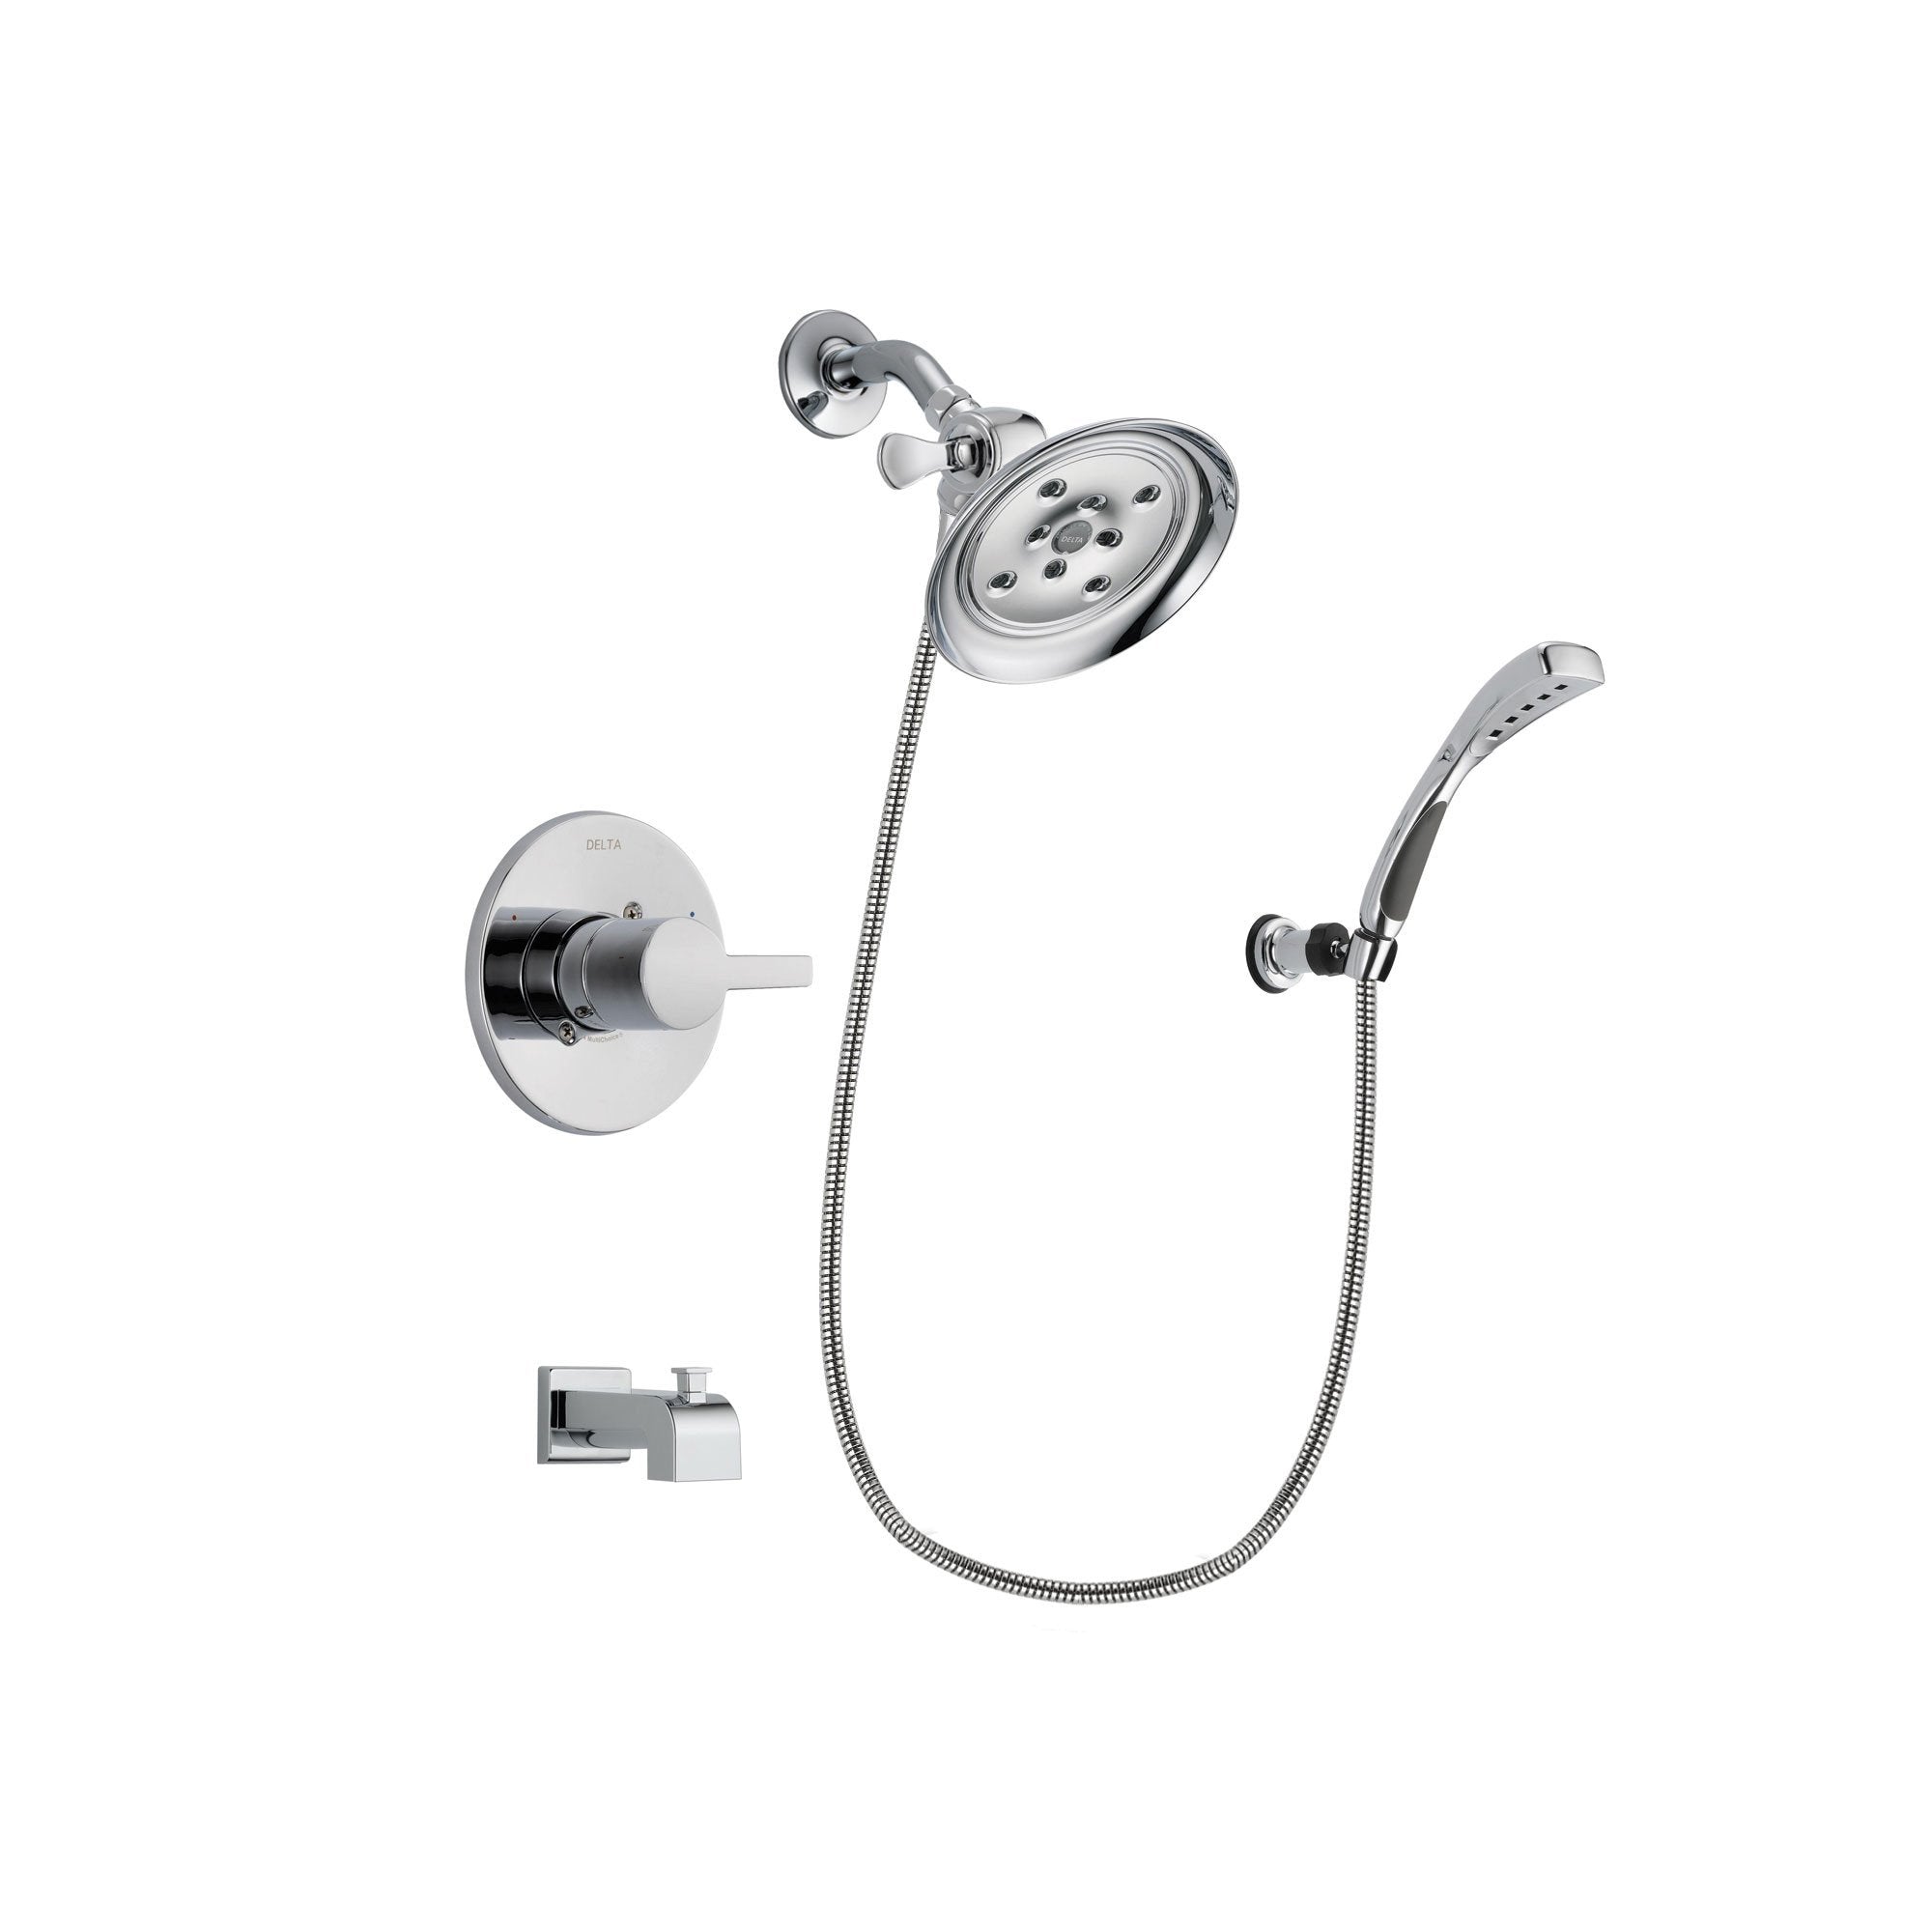 Delta Compel Chrome Finish Tub and Shower Faucet System Package with Large Rain Showerhead and Wall-Mount Bracket with Handheld Shower Spray Includes Rough-in Valve and Tub Spout DSP1051V